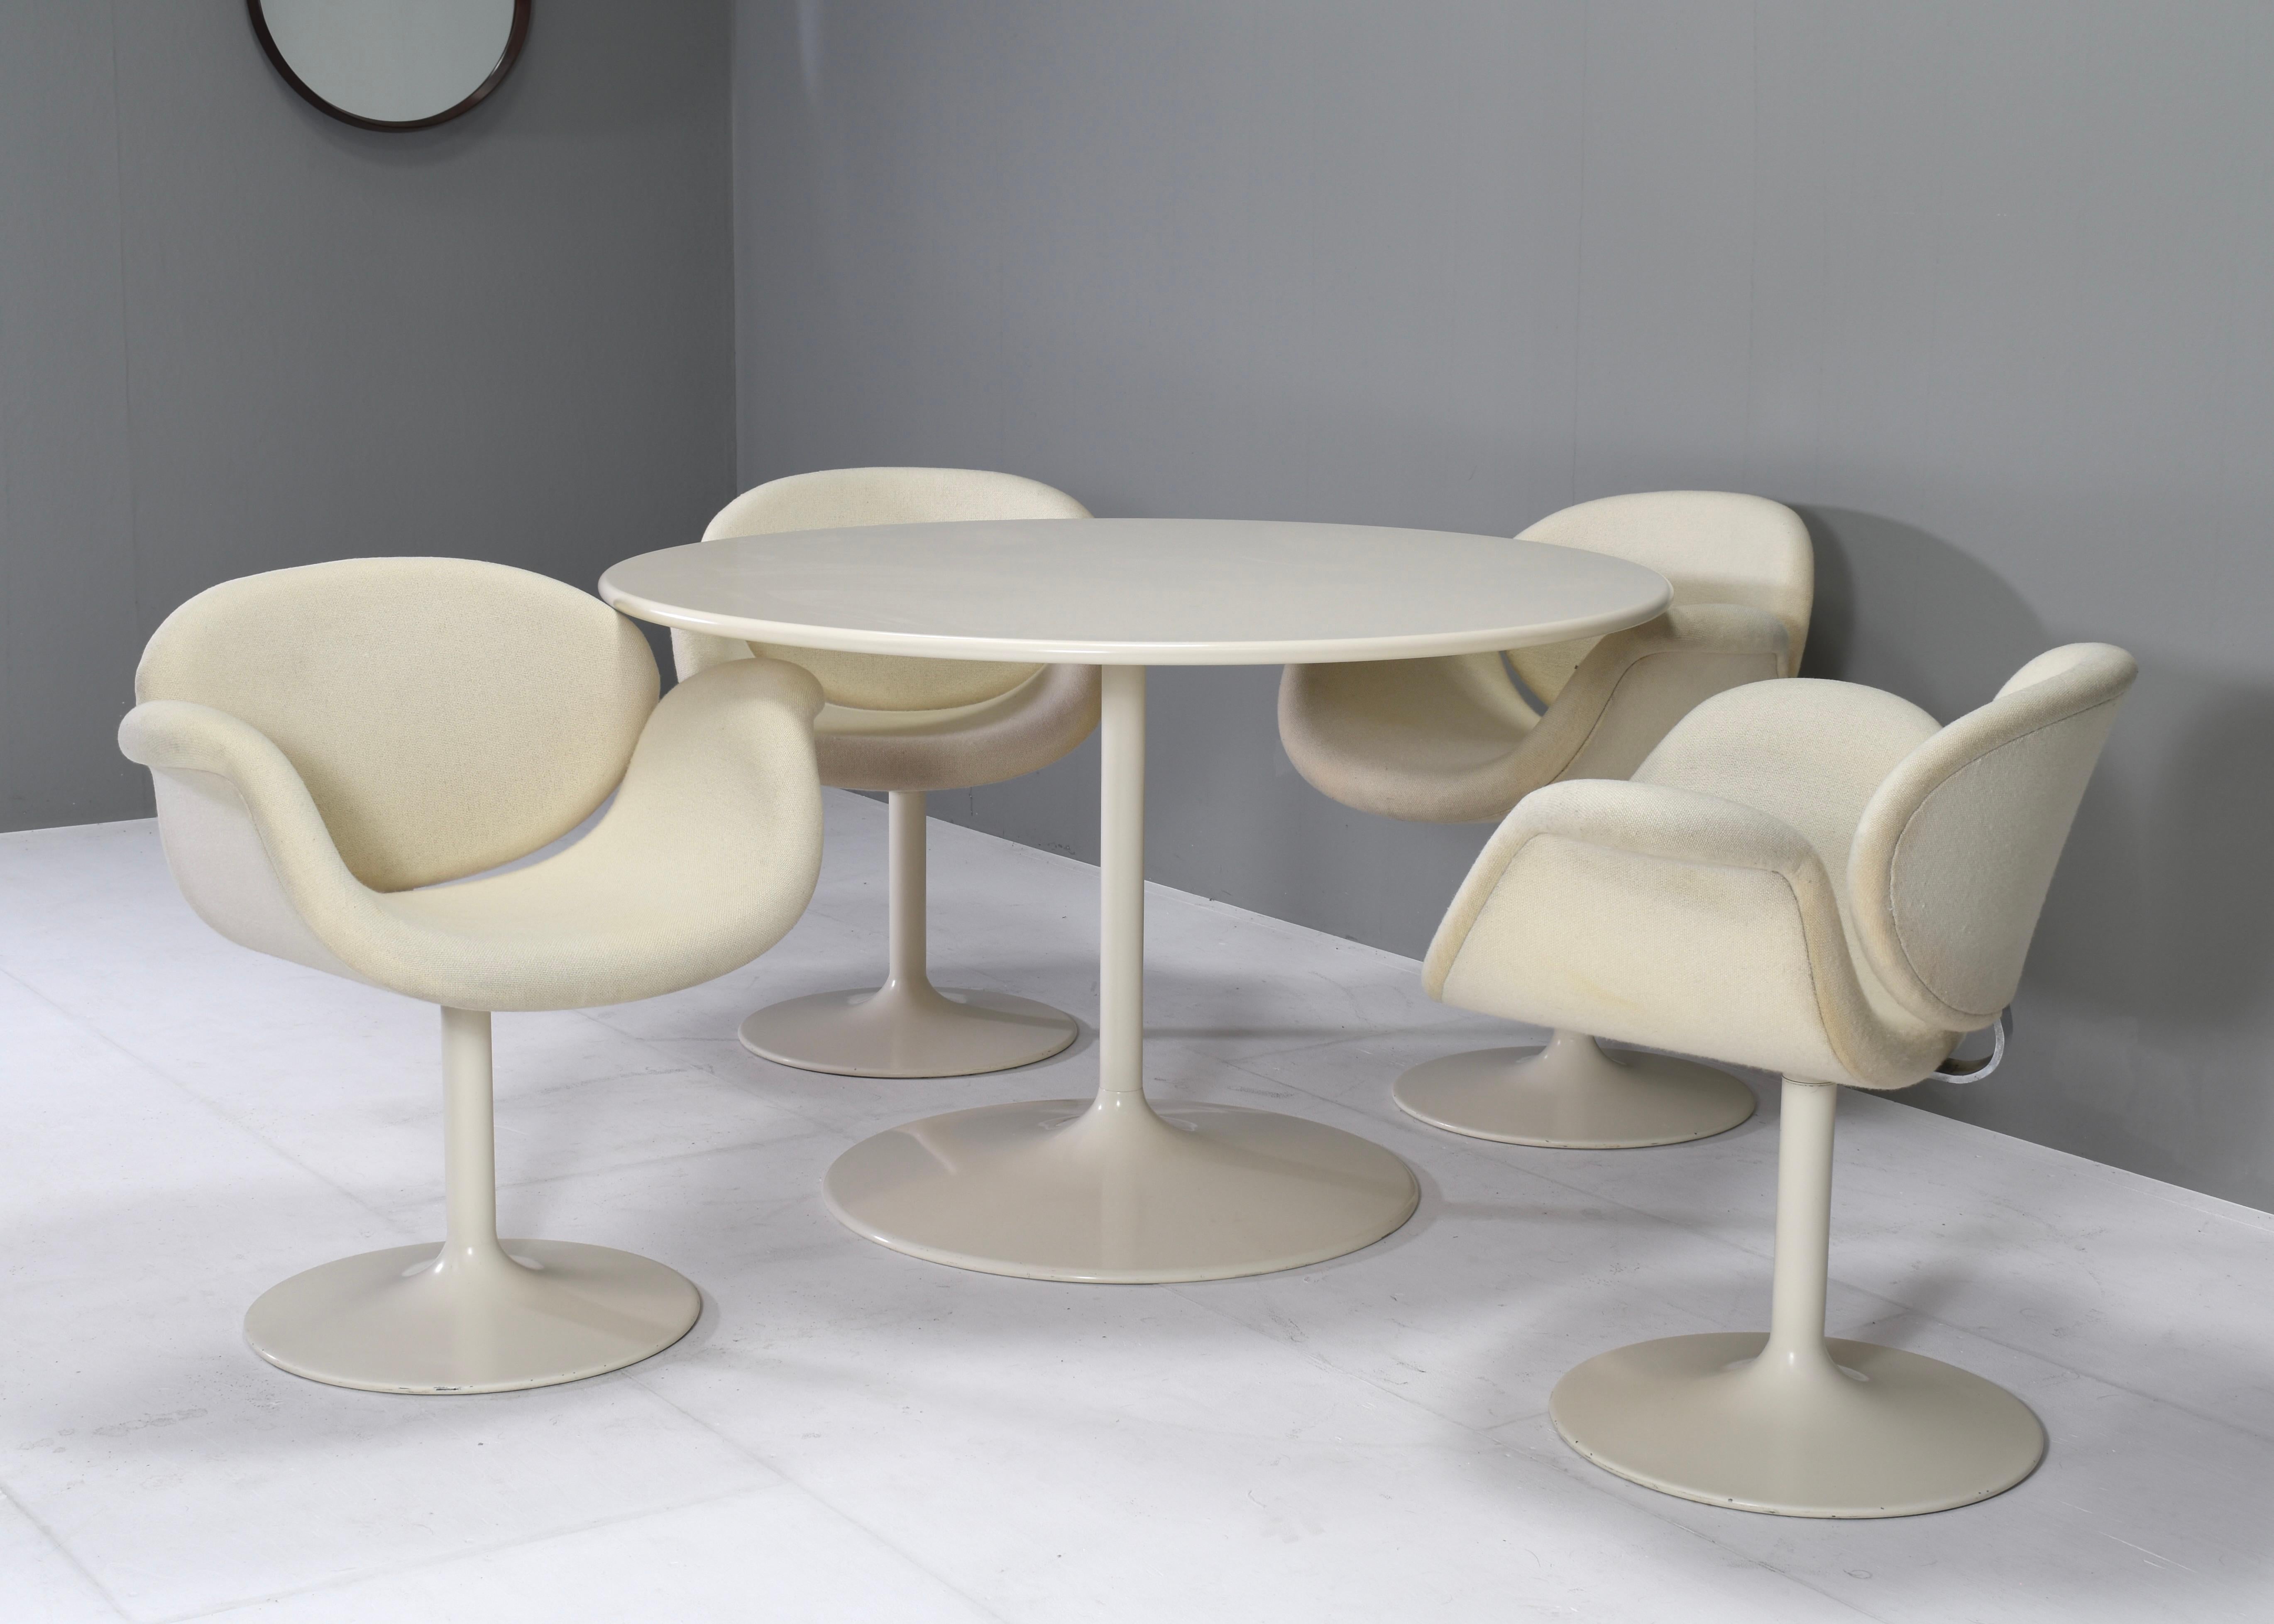 Very rare and complete 1st edition dinner set by Pierre Paulin for Artifort, Netherlands – 1965.
This is a rare and complete 1st edition set.
The chairs swivel. The table top has been professionally refinished in the same colour. The fabric is